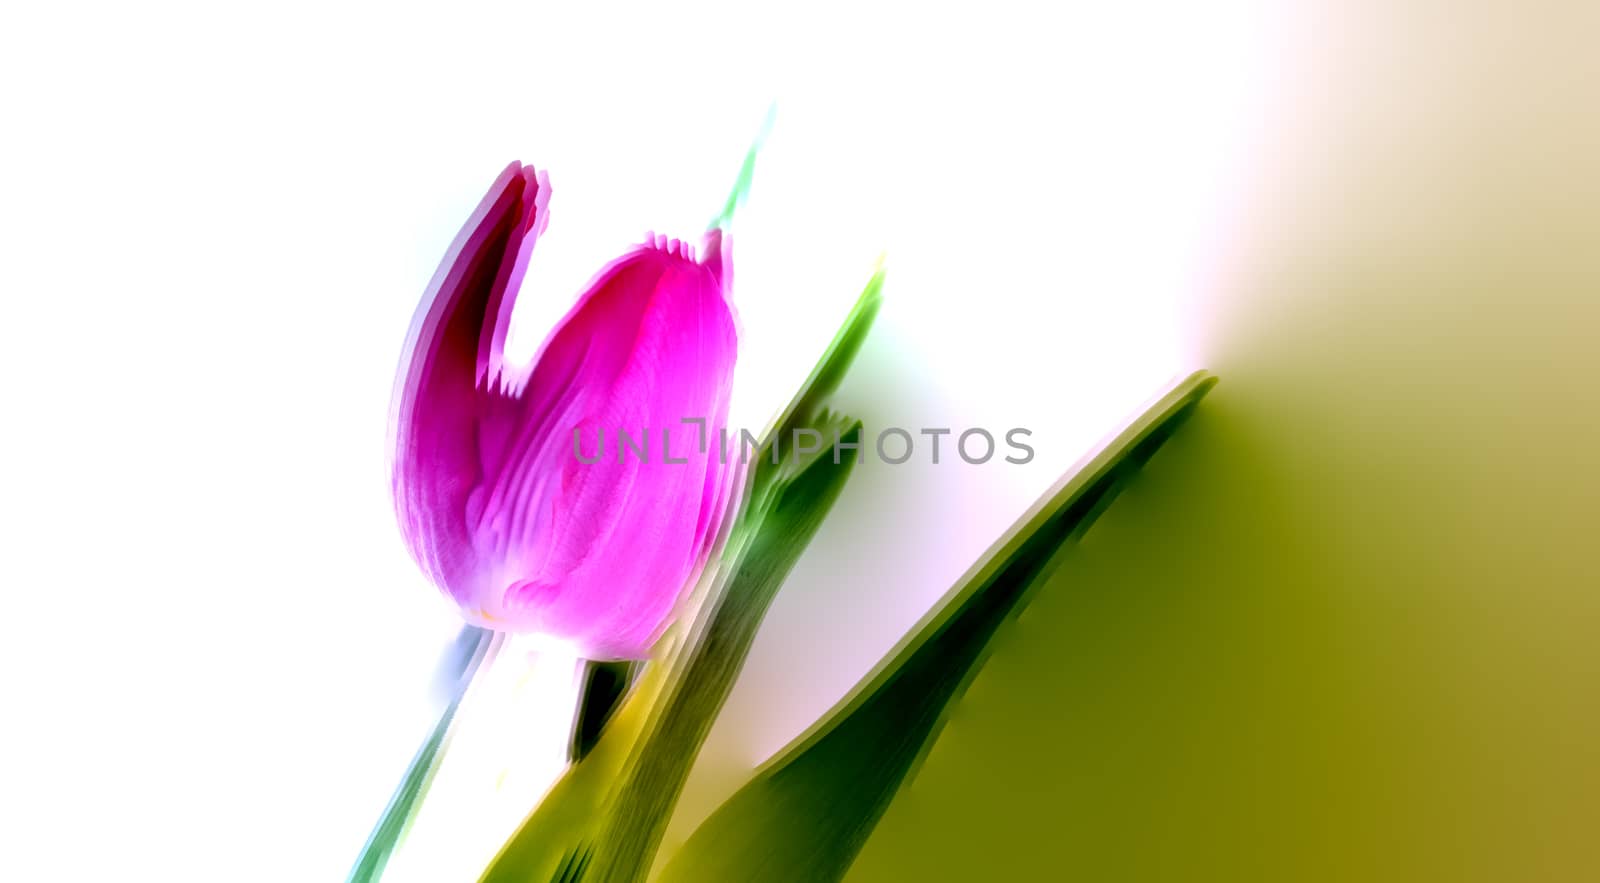 art impression of a tulip flower by compuinfoto